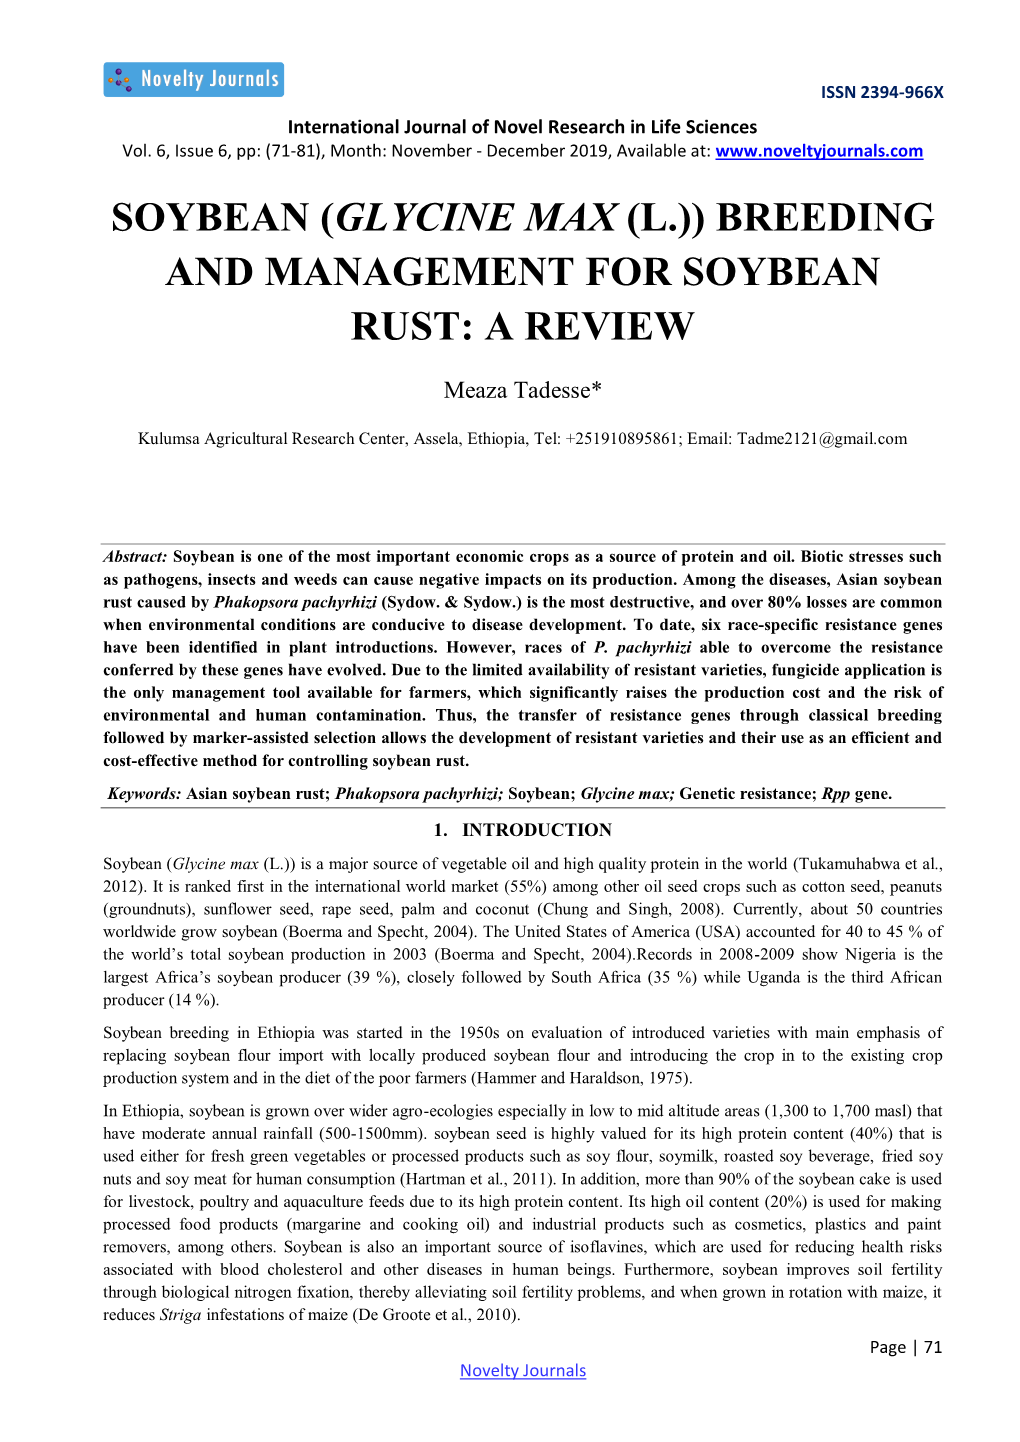 Soybean (Glycine Max (L.)) Breeding and Management for Soybean Rust: a Review